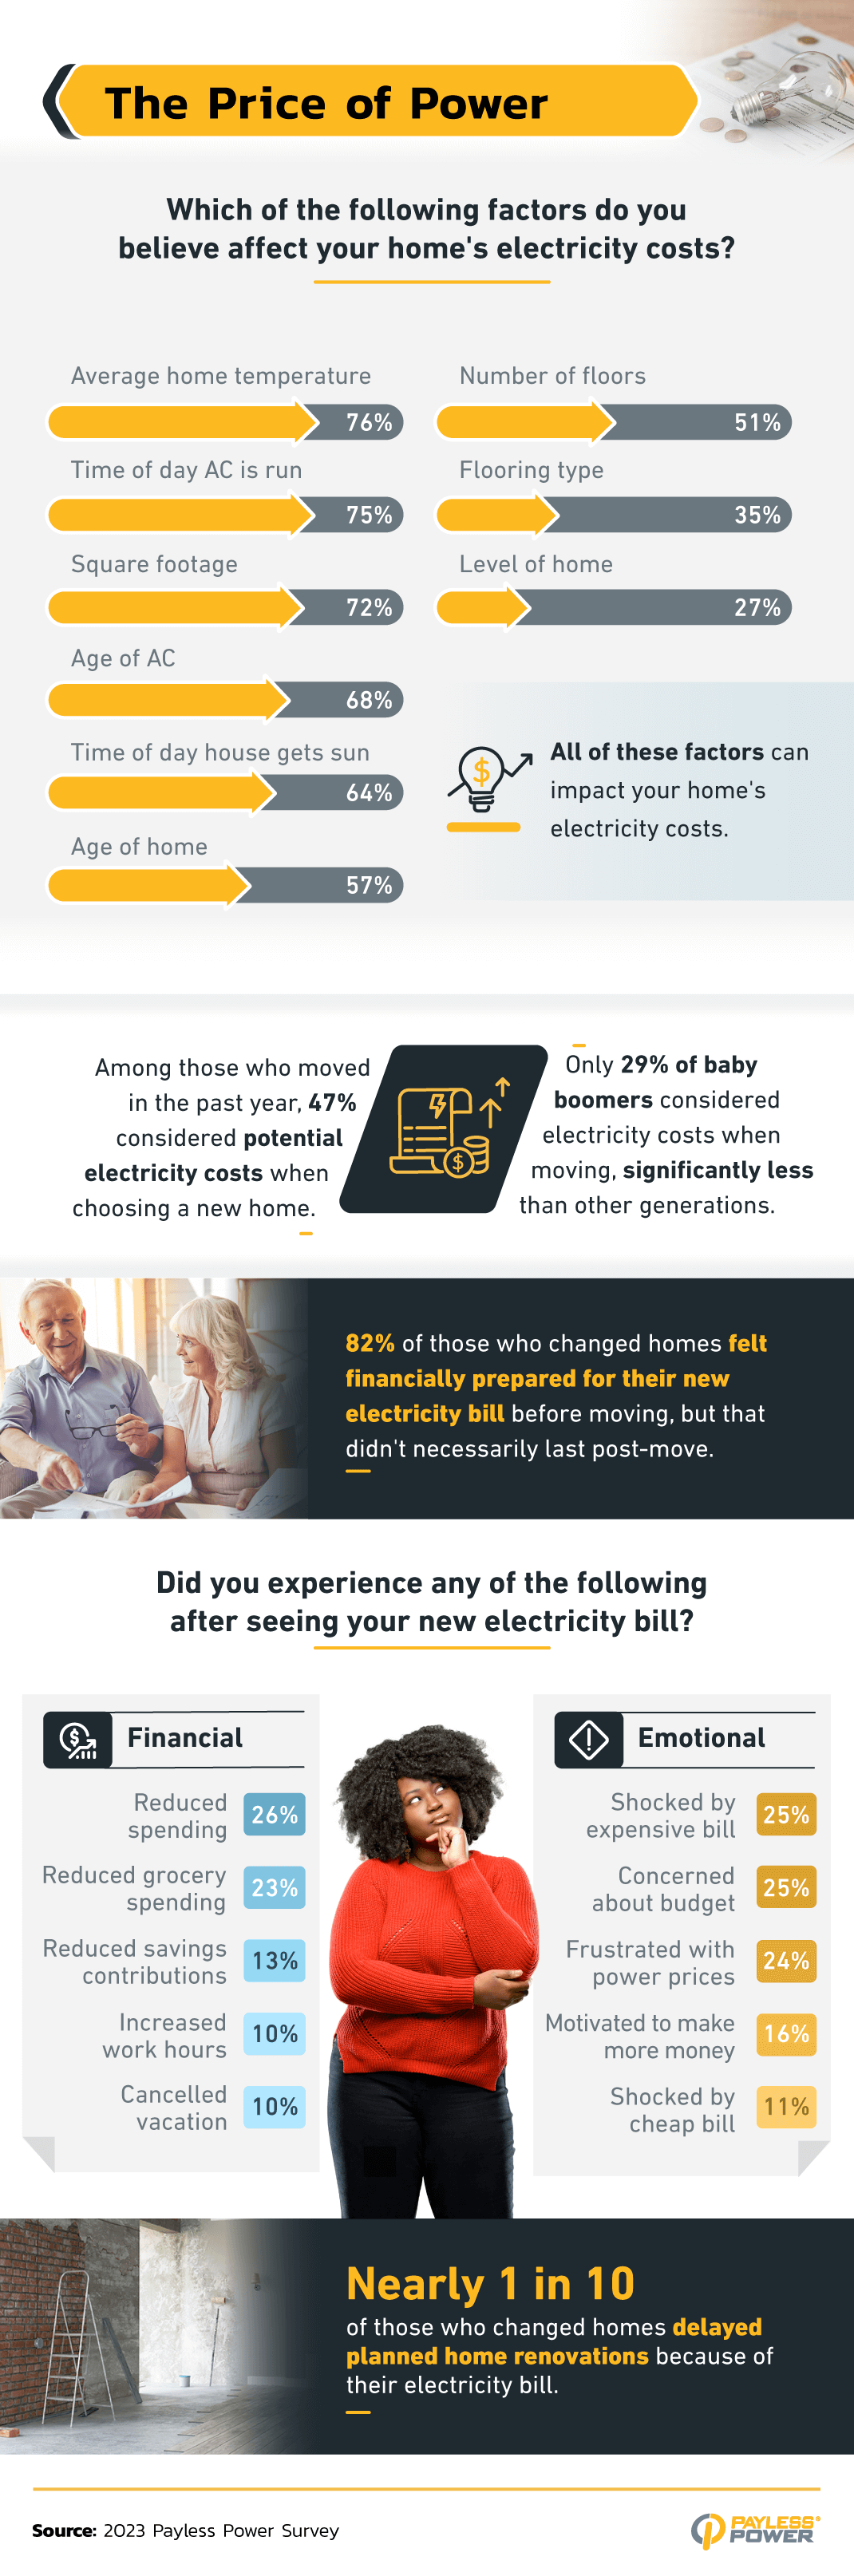 Americans' reactions to high energy bills